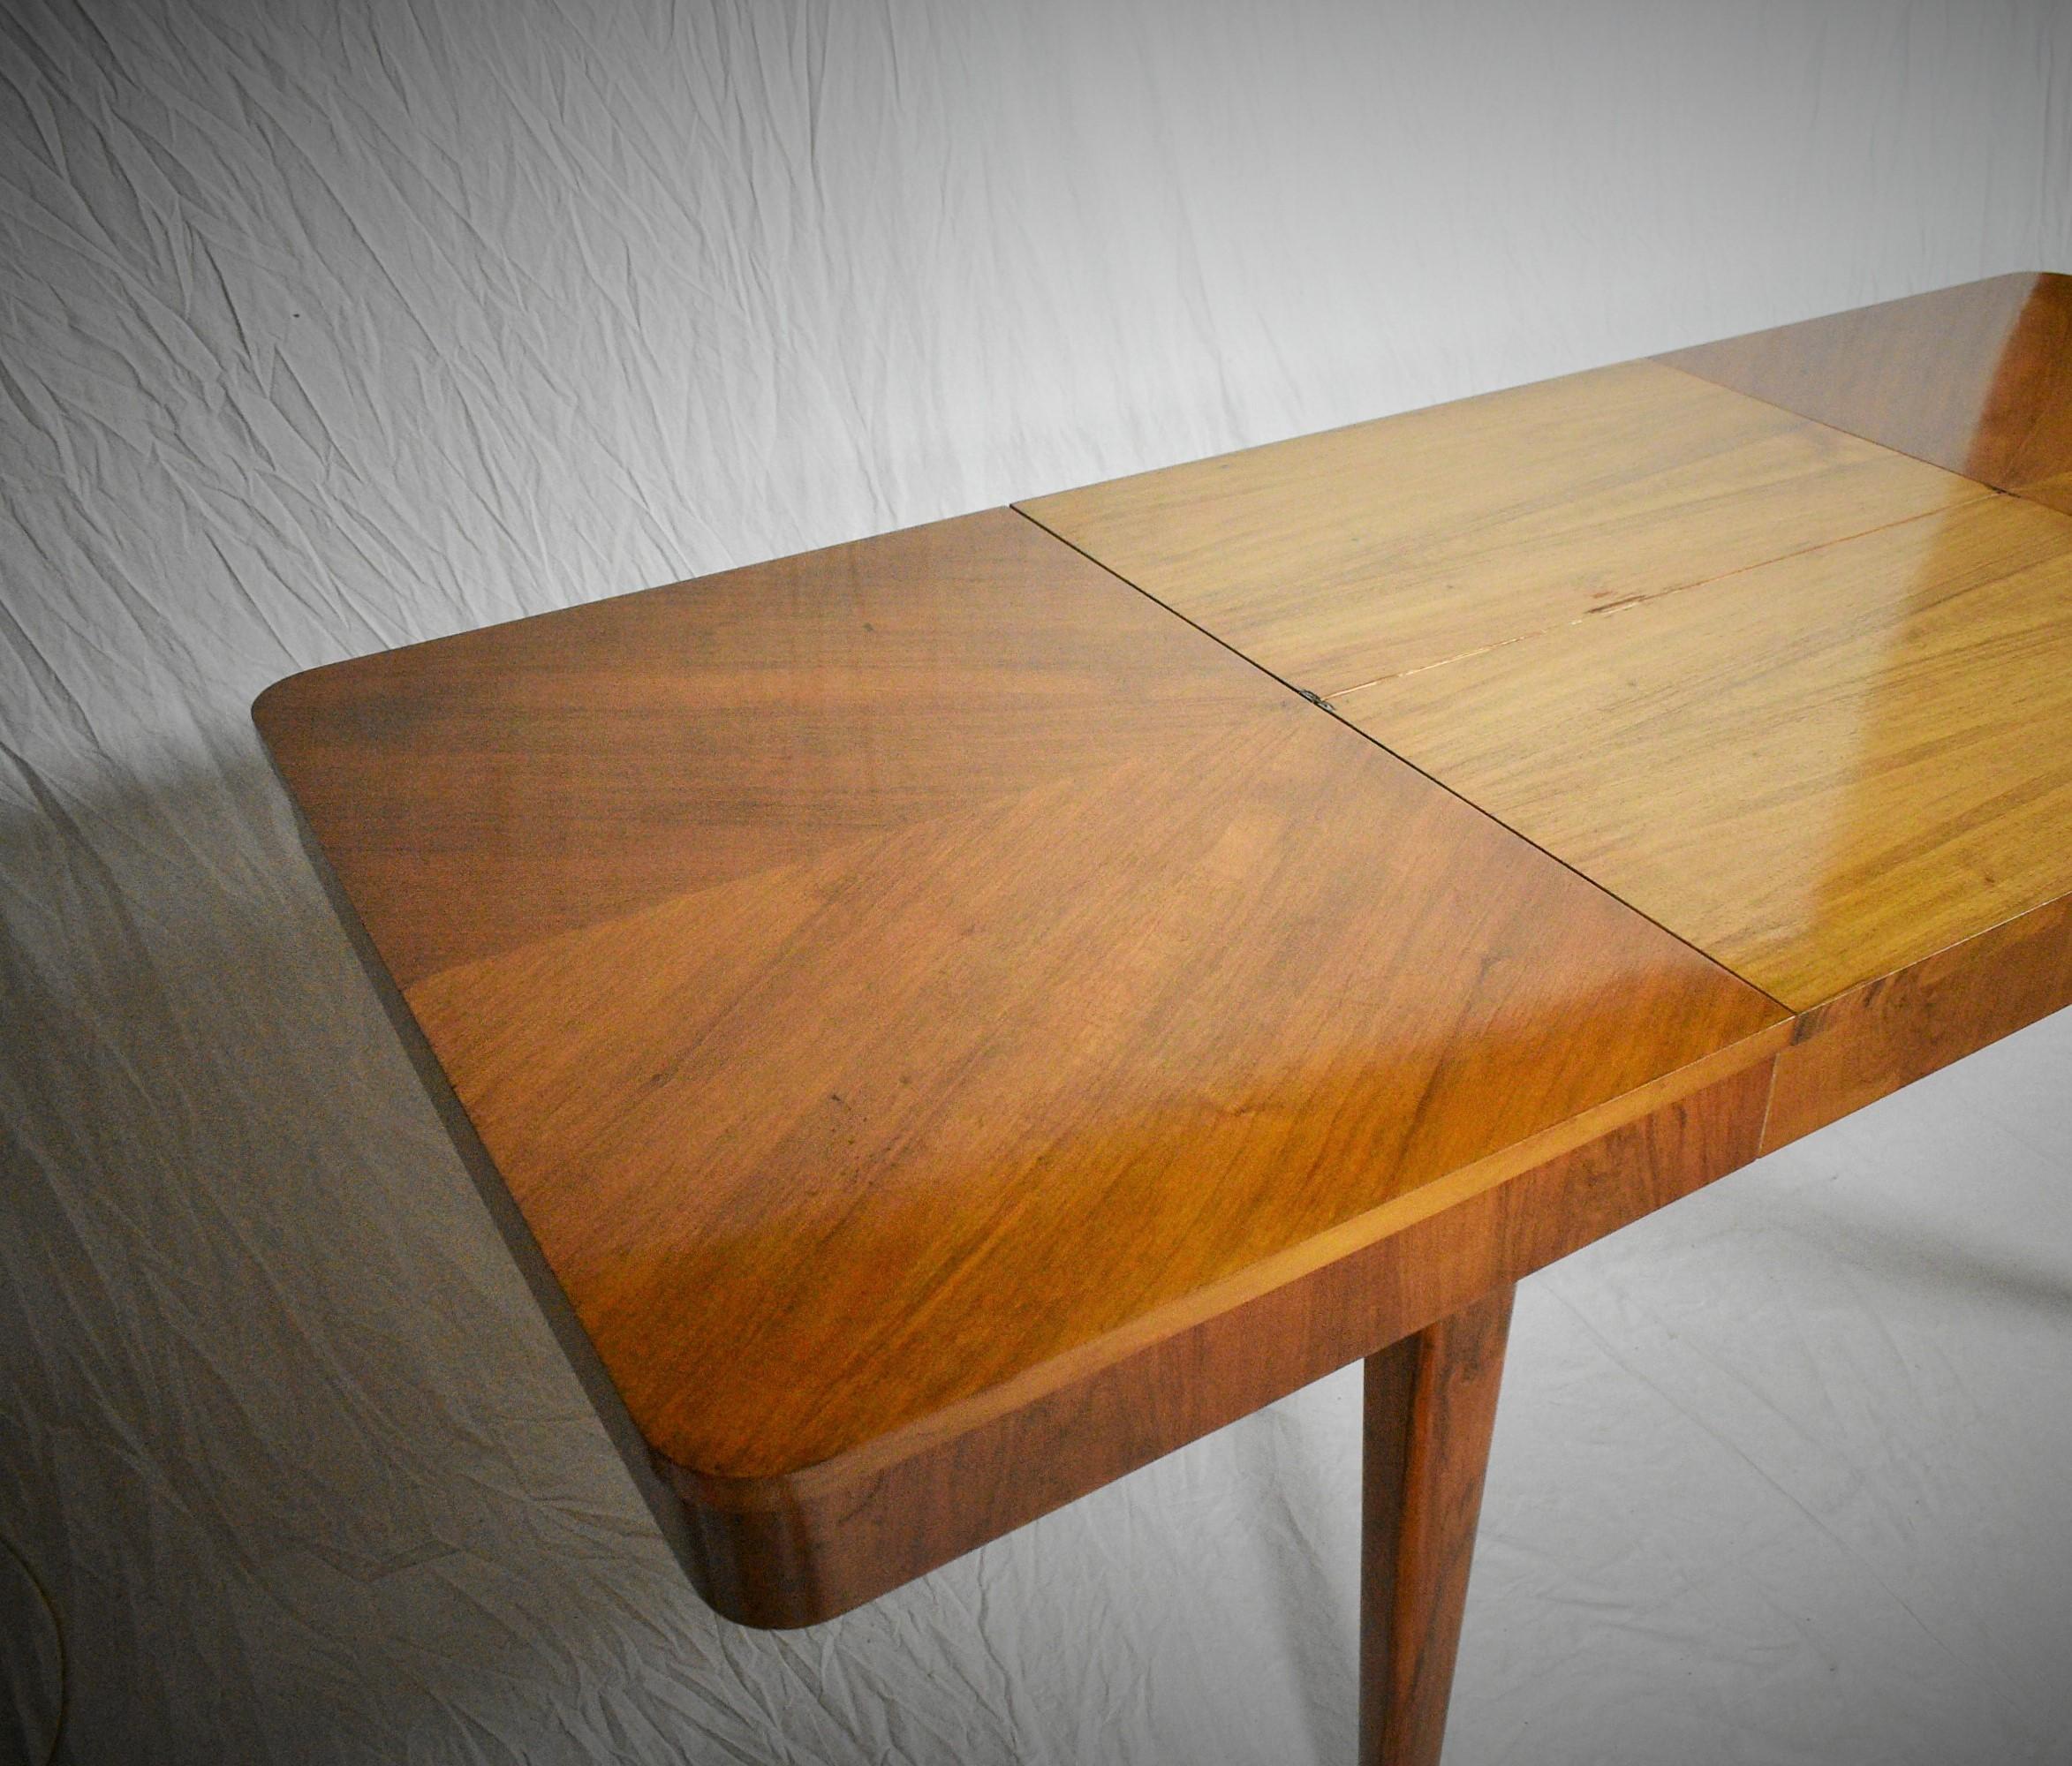 - Made in Czechoslovakia
- Made of wood
- Dimension of extending width 190 cm
- Good condition.
- The table is Stabil
- Cleaned.